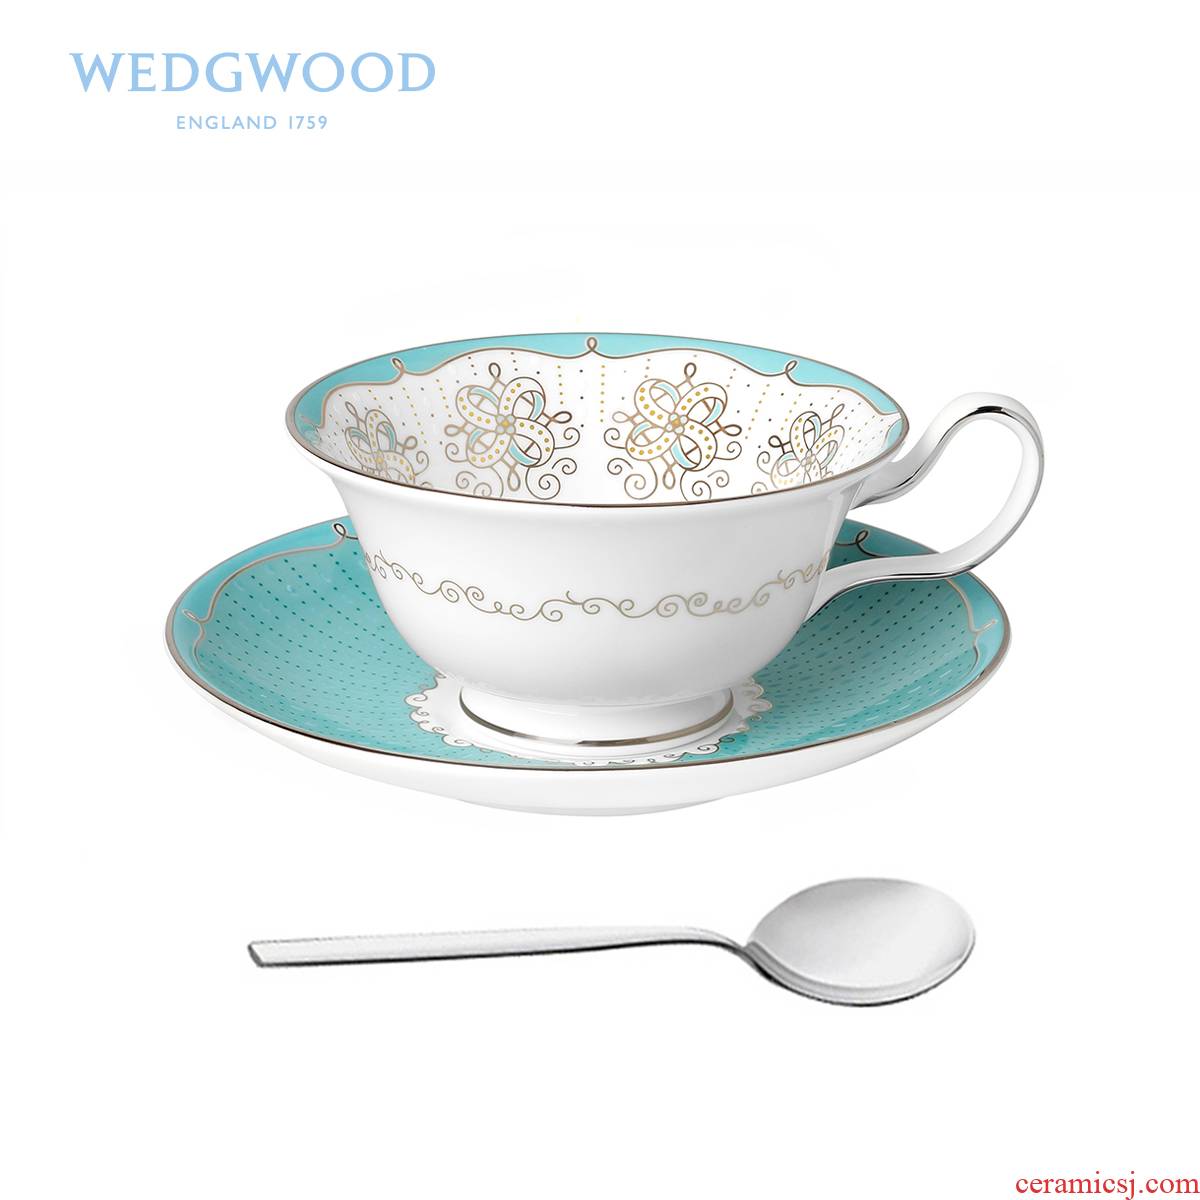 British Wedgwood Psyche series "love in its ehrs blue/pink ipads China red tea cups + WMF spoon